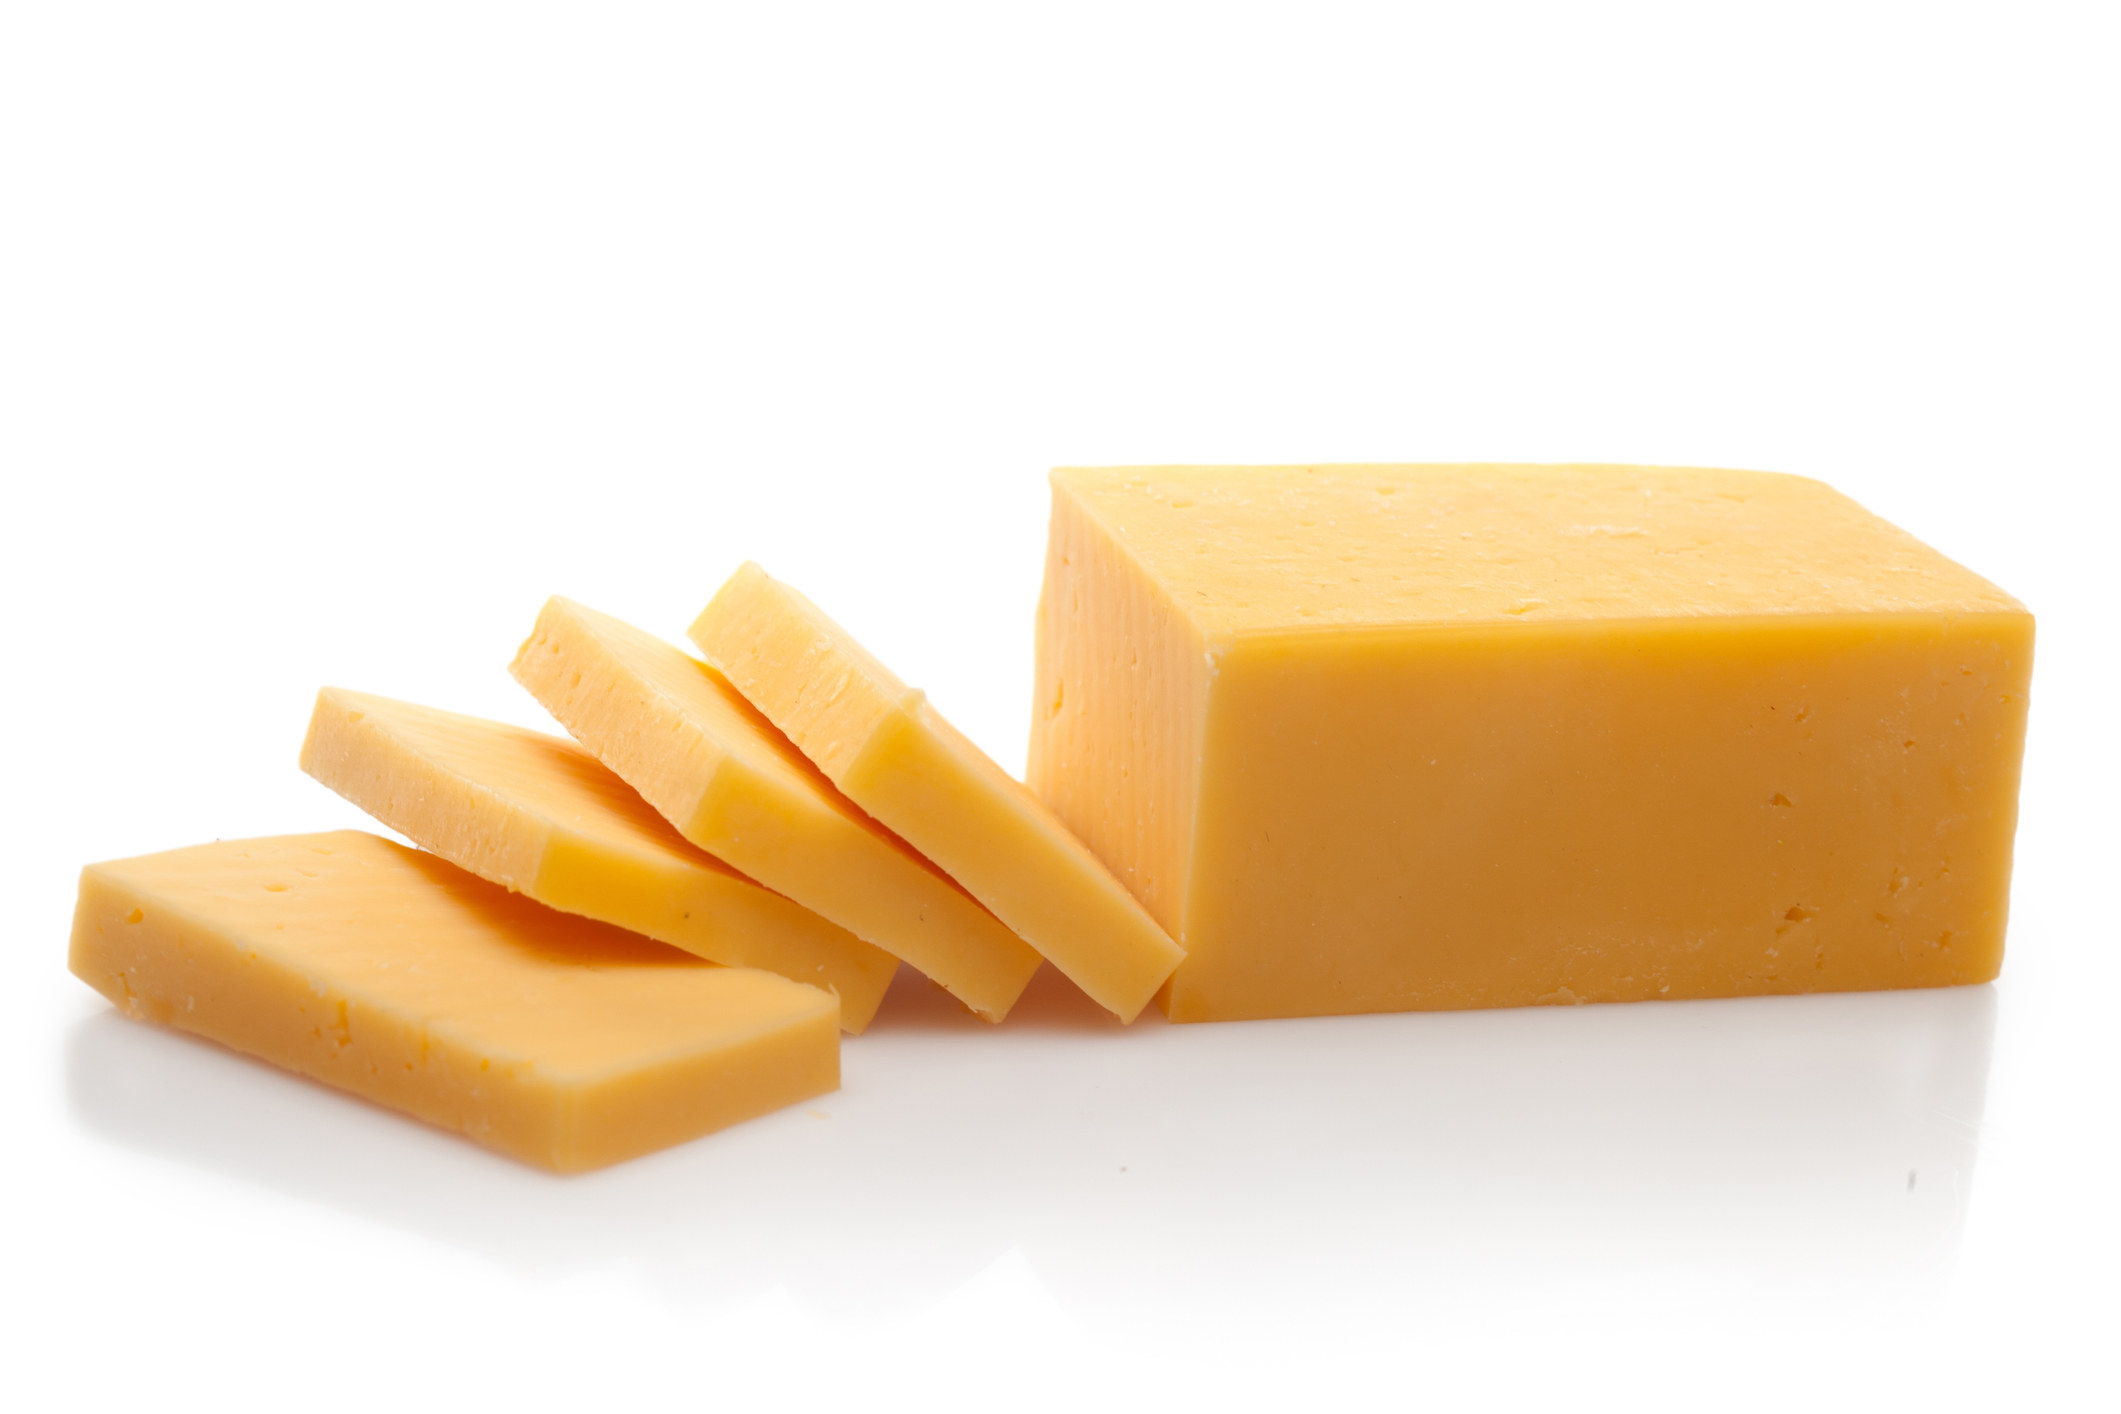 A block of Cheddar with slices